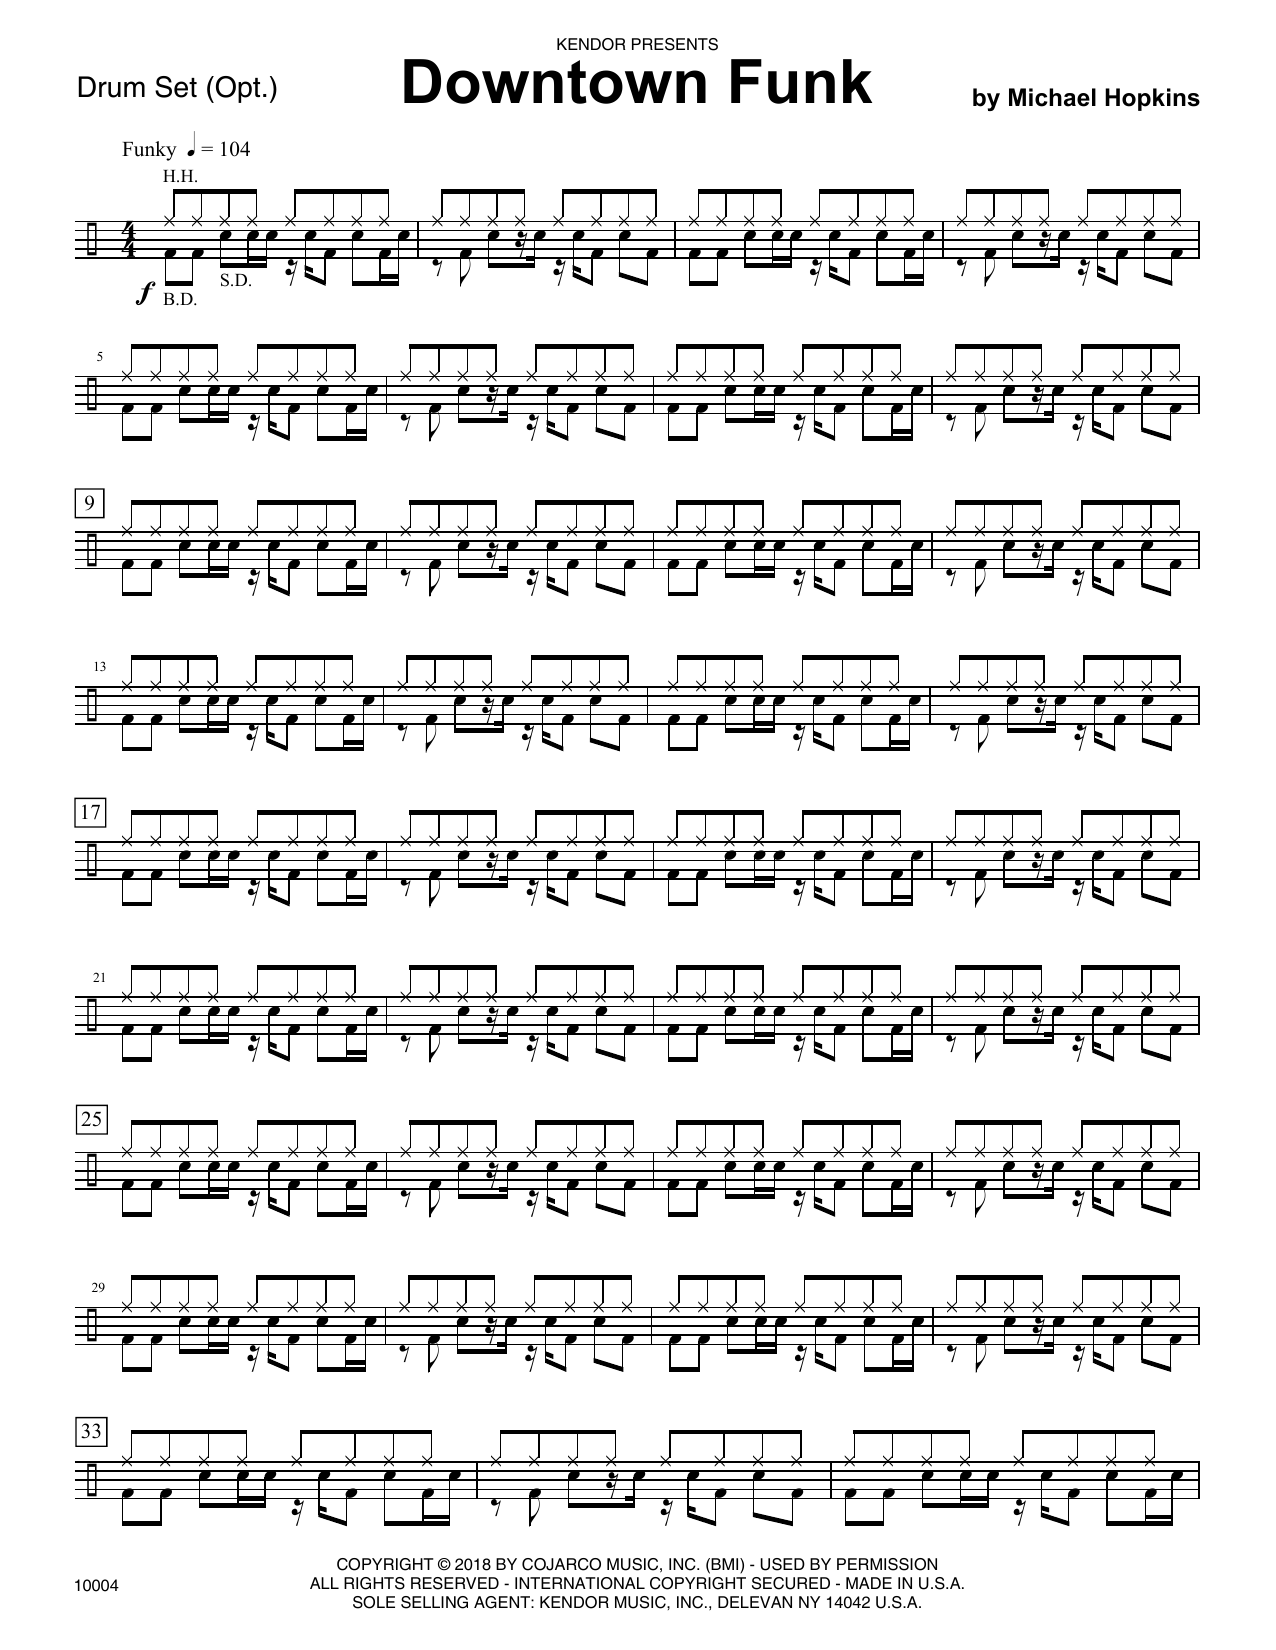 Michael Hopkins Downtown Funk - Drum Set sheet music preview music notes and score for Orchestra including 3 page(s)